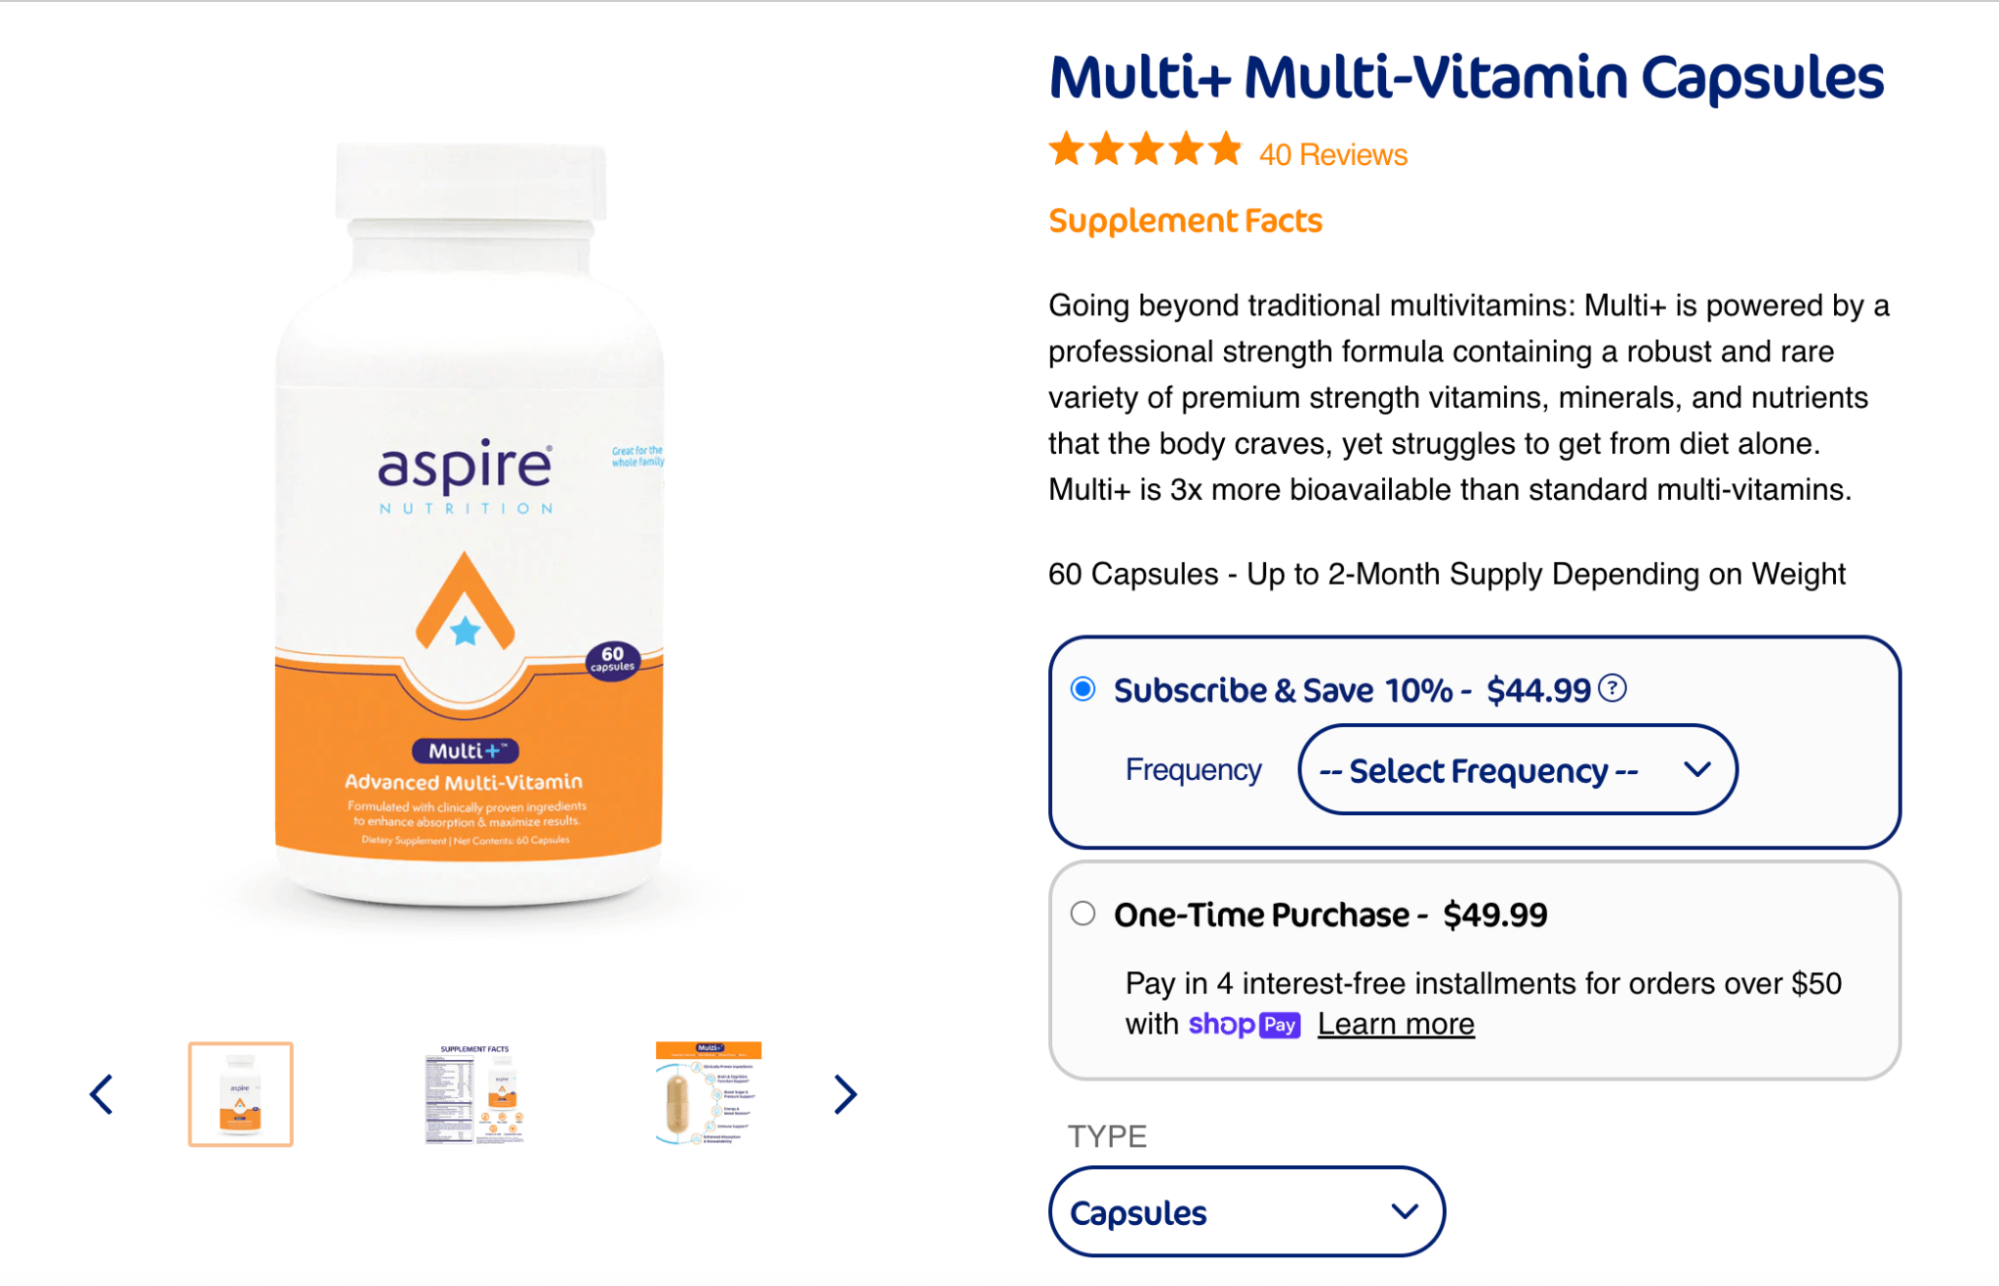 Aspire Nutrition gives customers the option to subscribe on every product page.